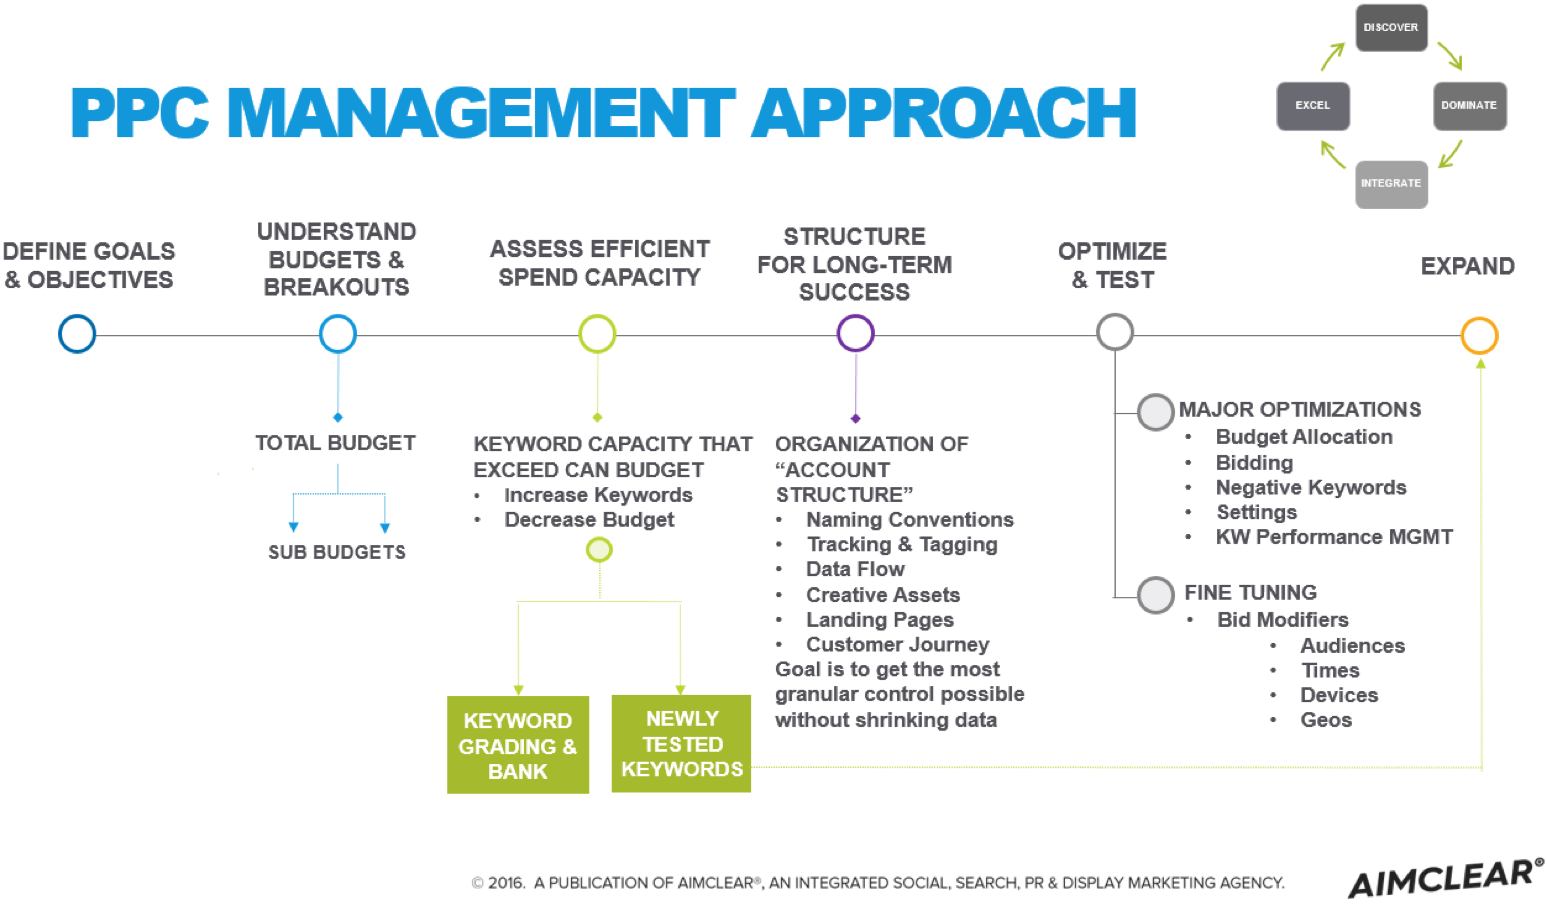 Aimclear PPC Management Approach